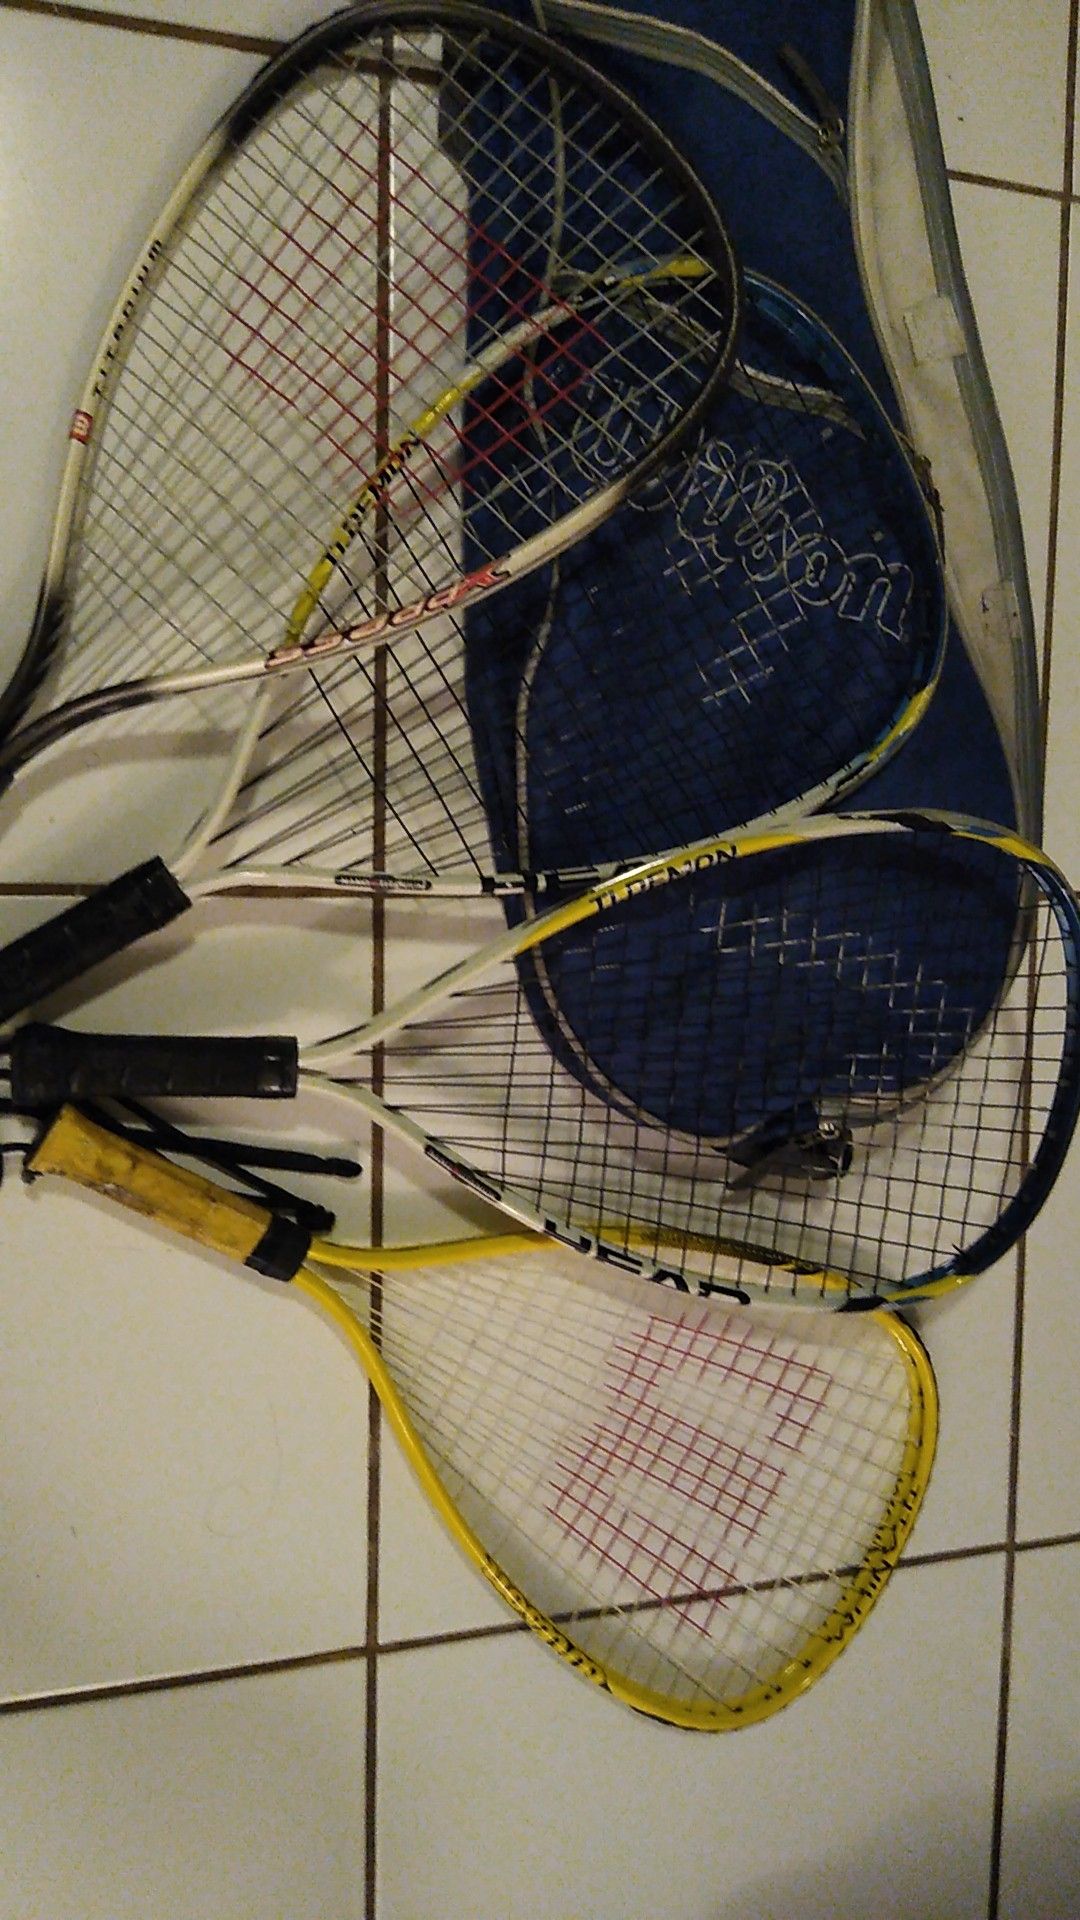 Wilson bag with rackets